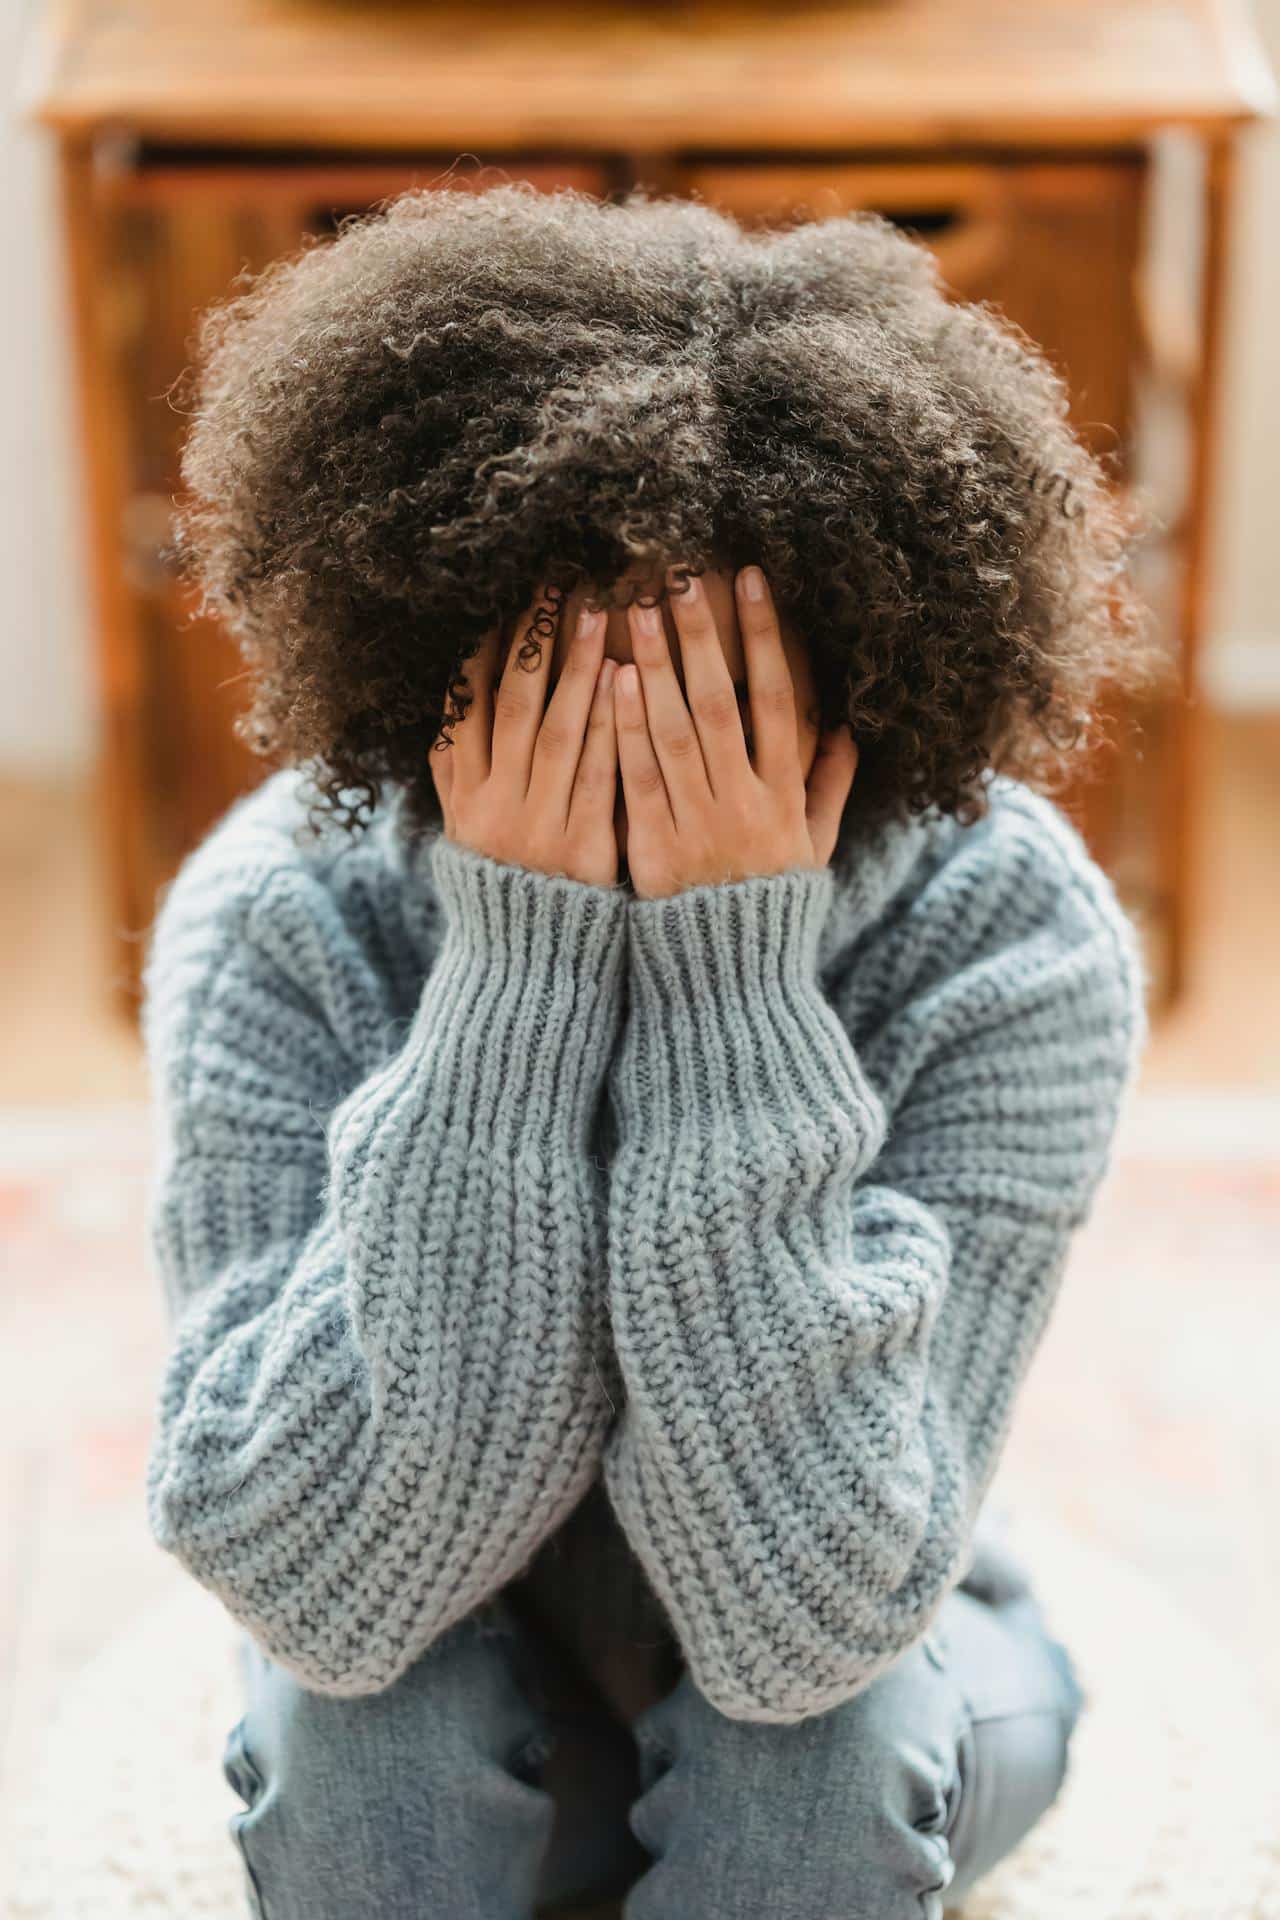 A Black woman with natural hair covers her face, as though stressed out or embarrassed.